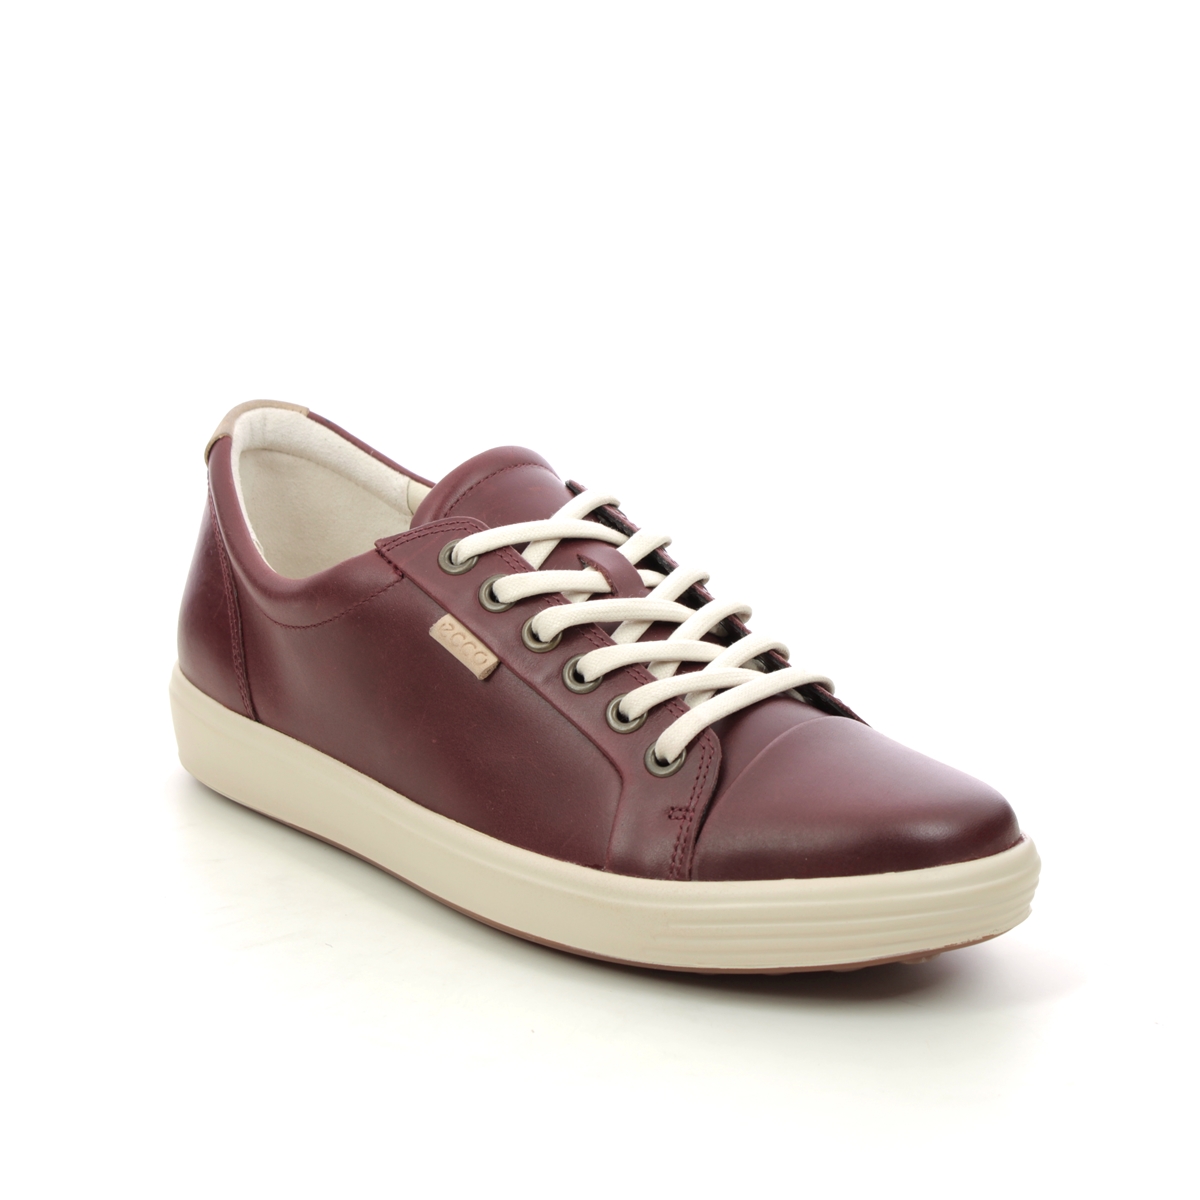 Ecco Soft 7 Lace Plum Womens Trainers 430003-01588 In Size 39 In Plain Plum